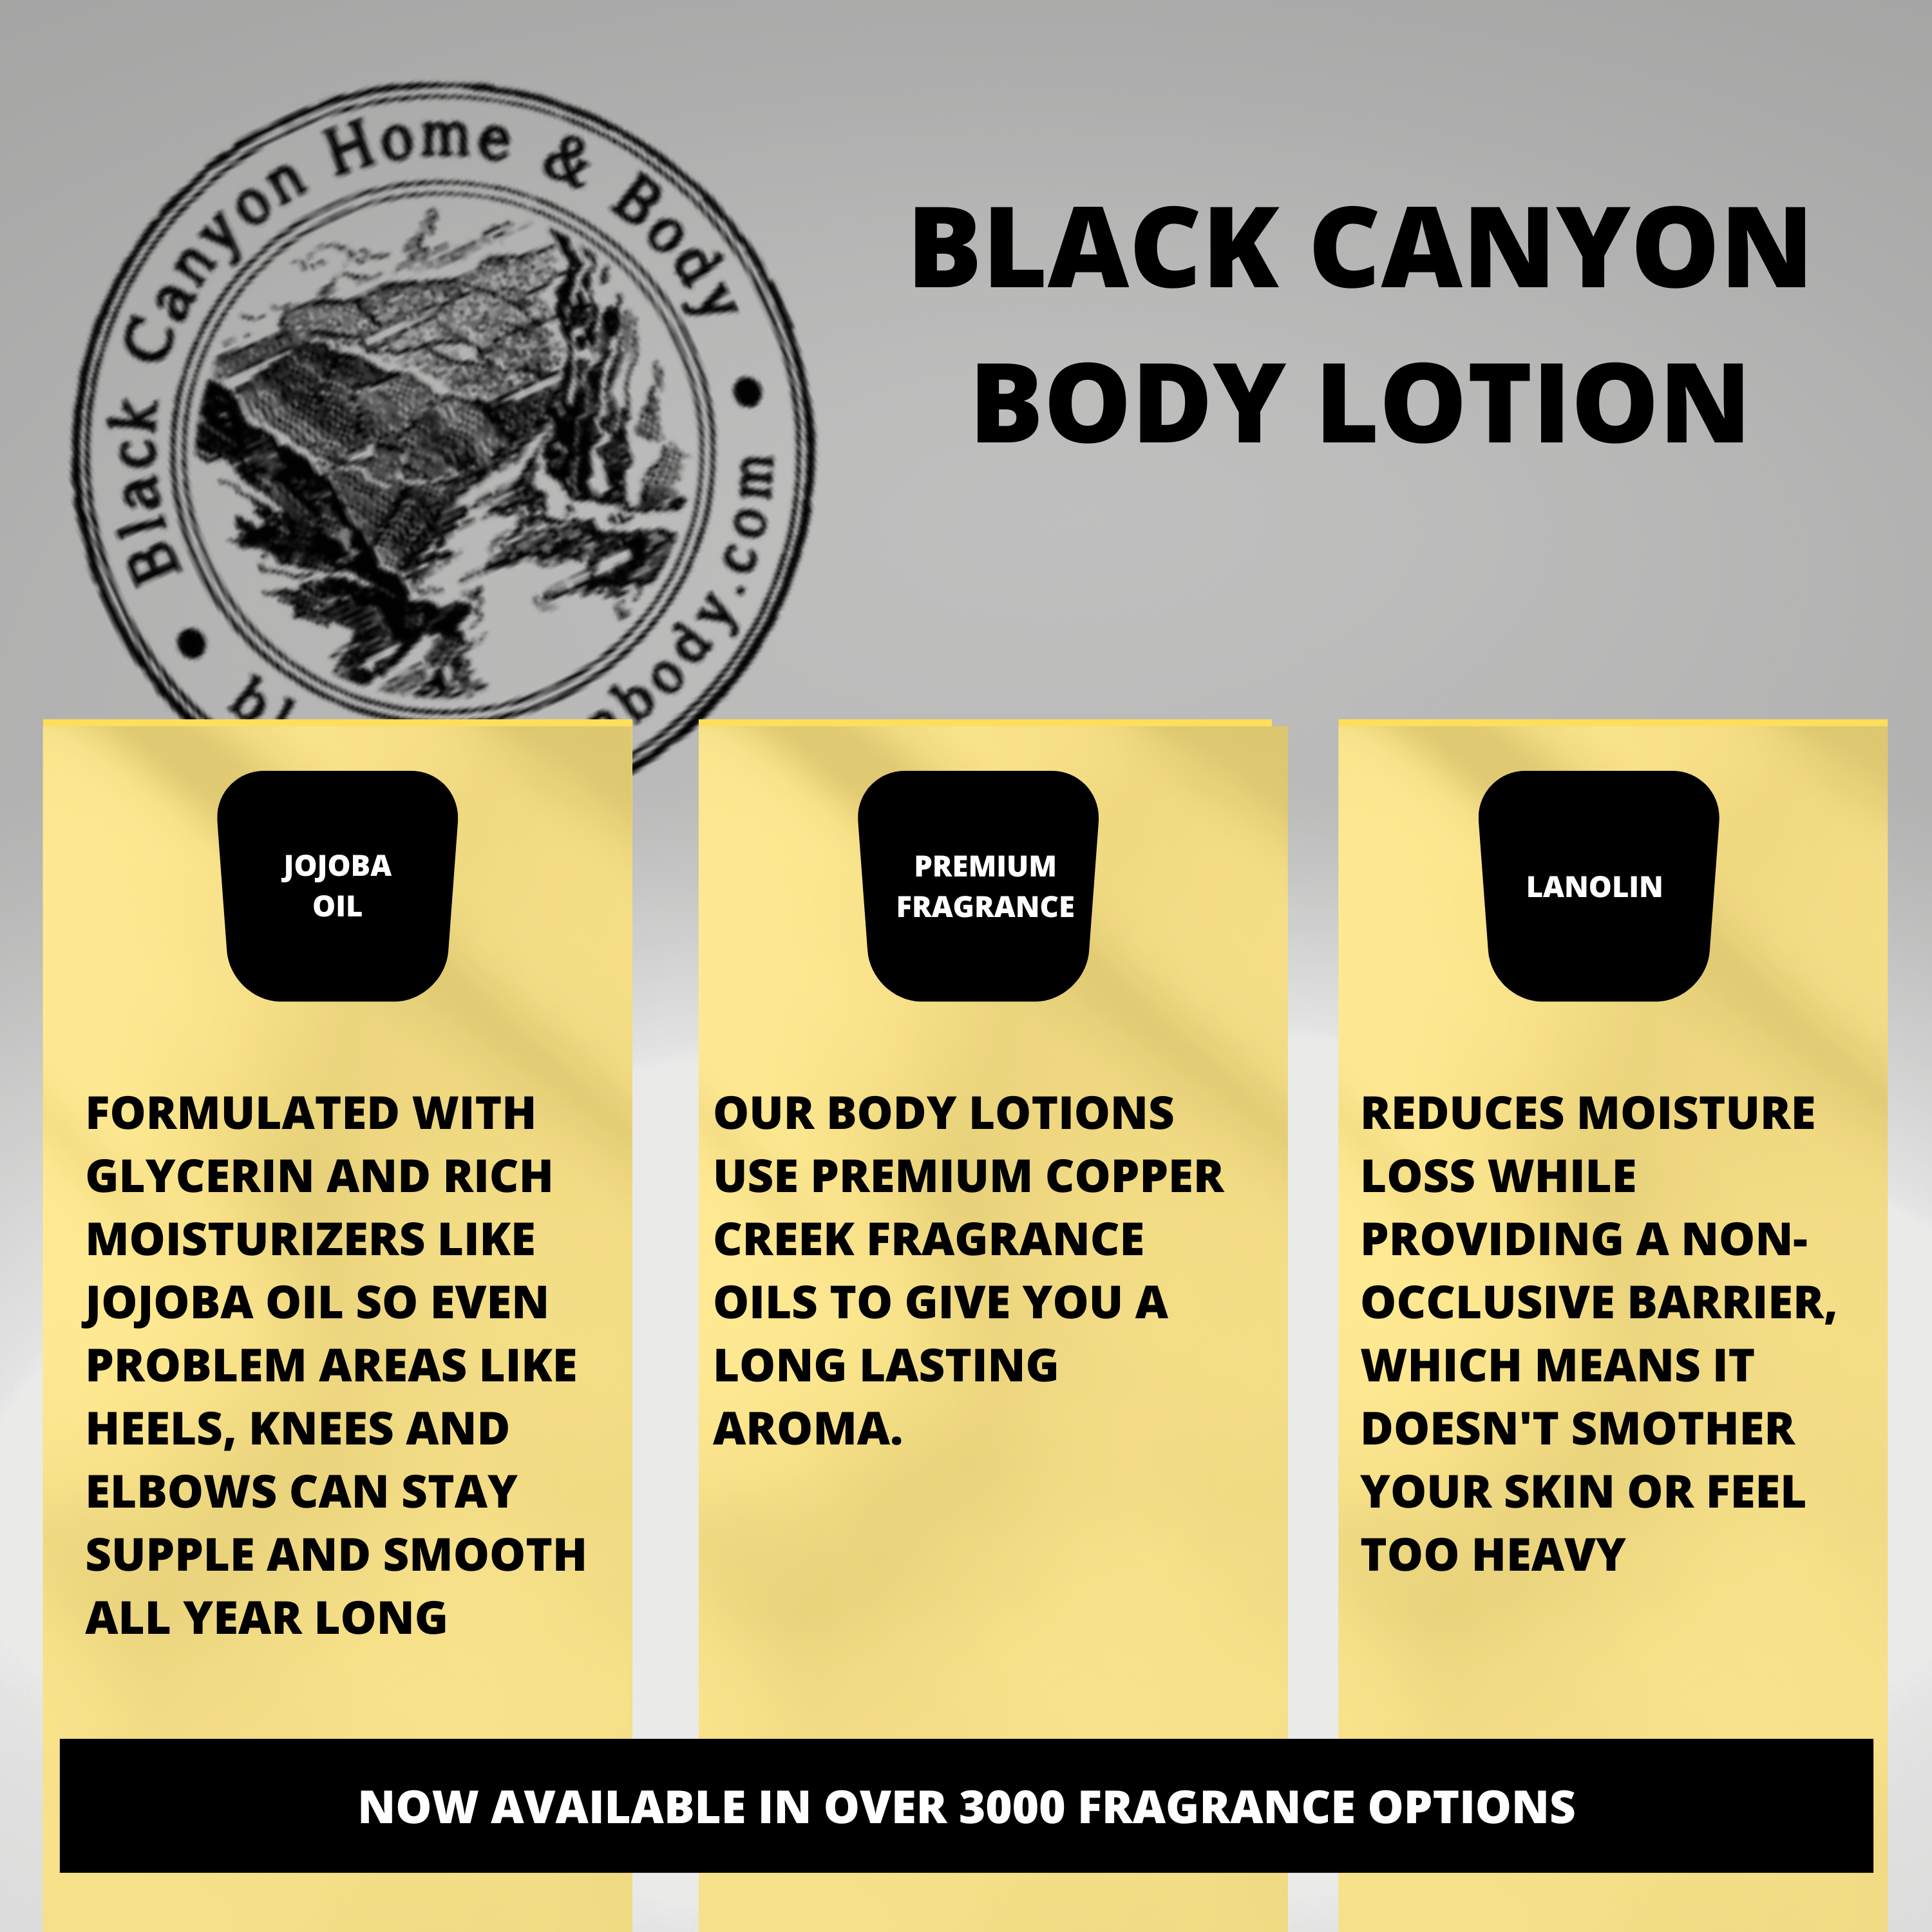 Black Canyon Hot Cocoa Scented Luxury Body Lotion with Lanolin and Jojoba Oil